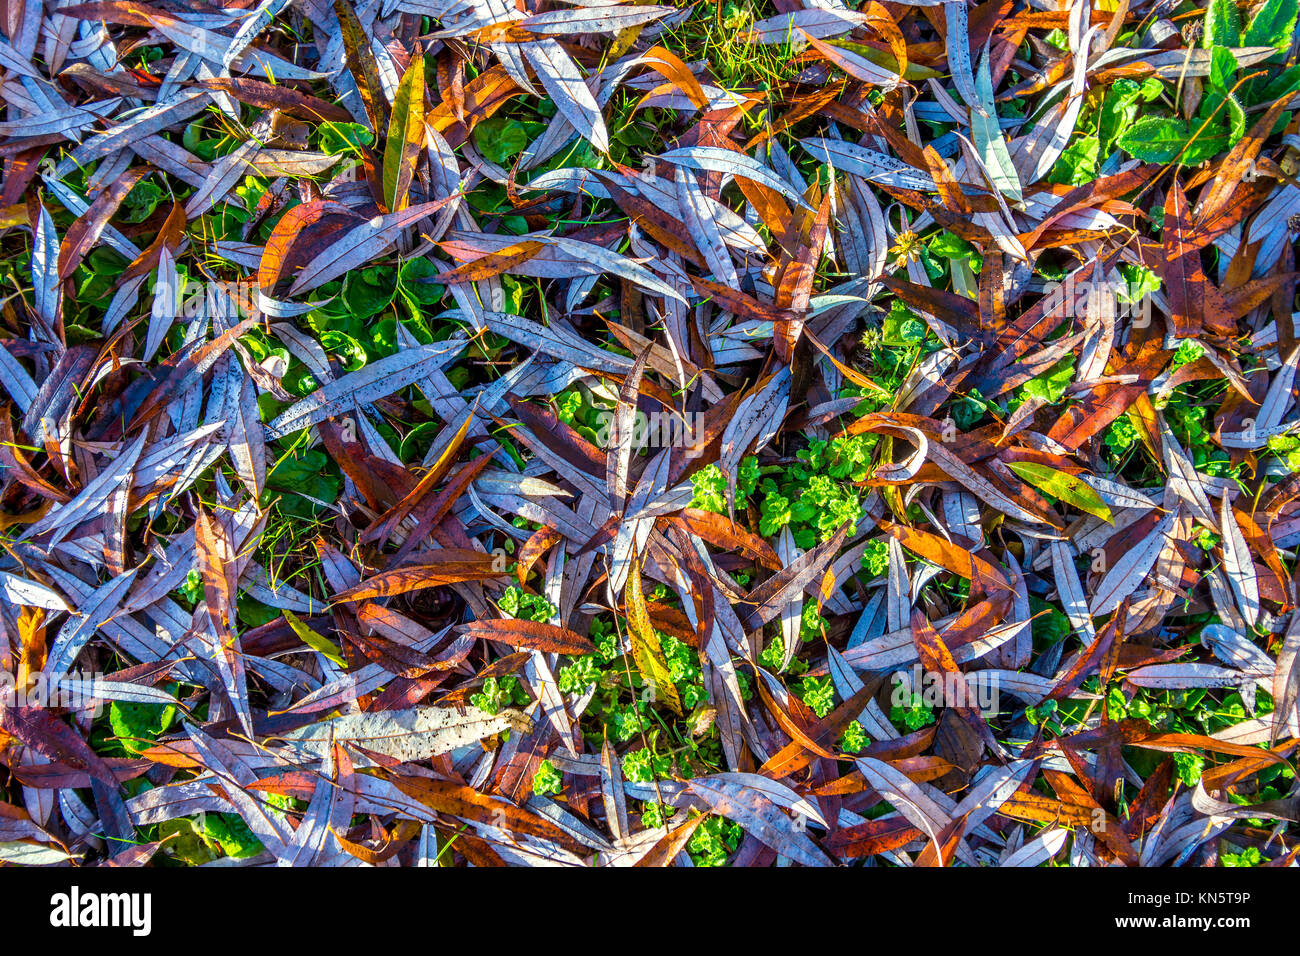 Willow tree leaves on ground. Stock Photo